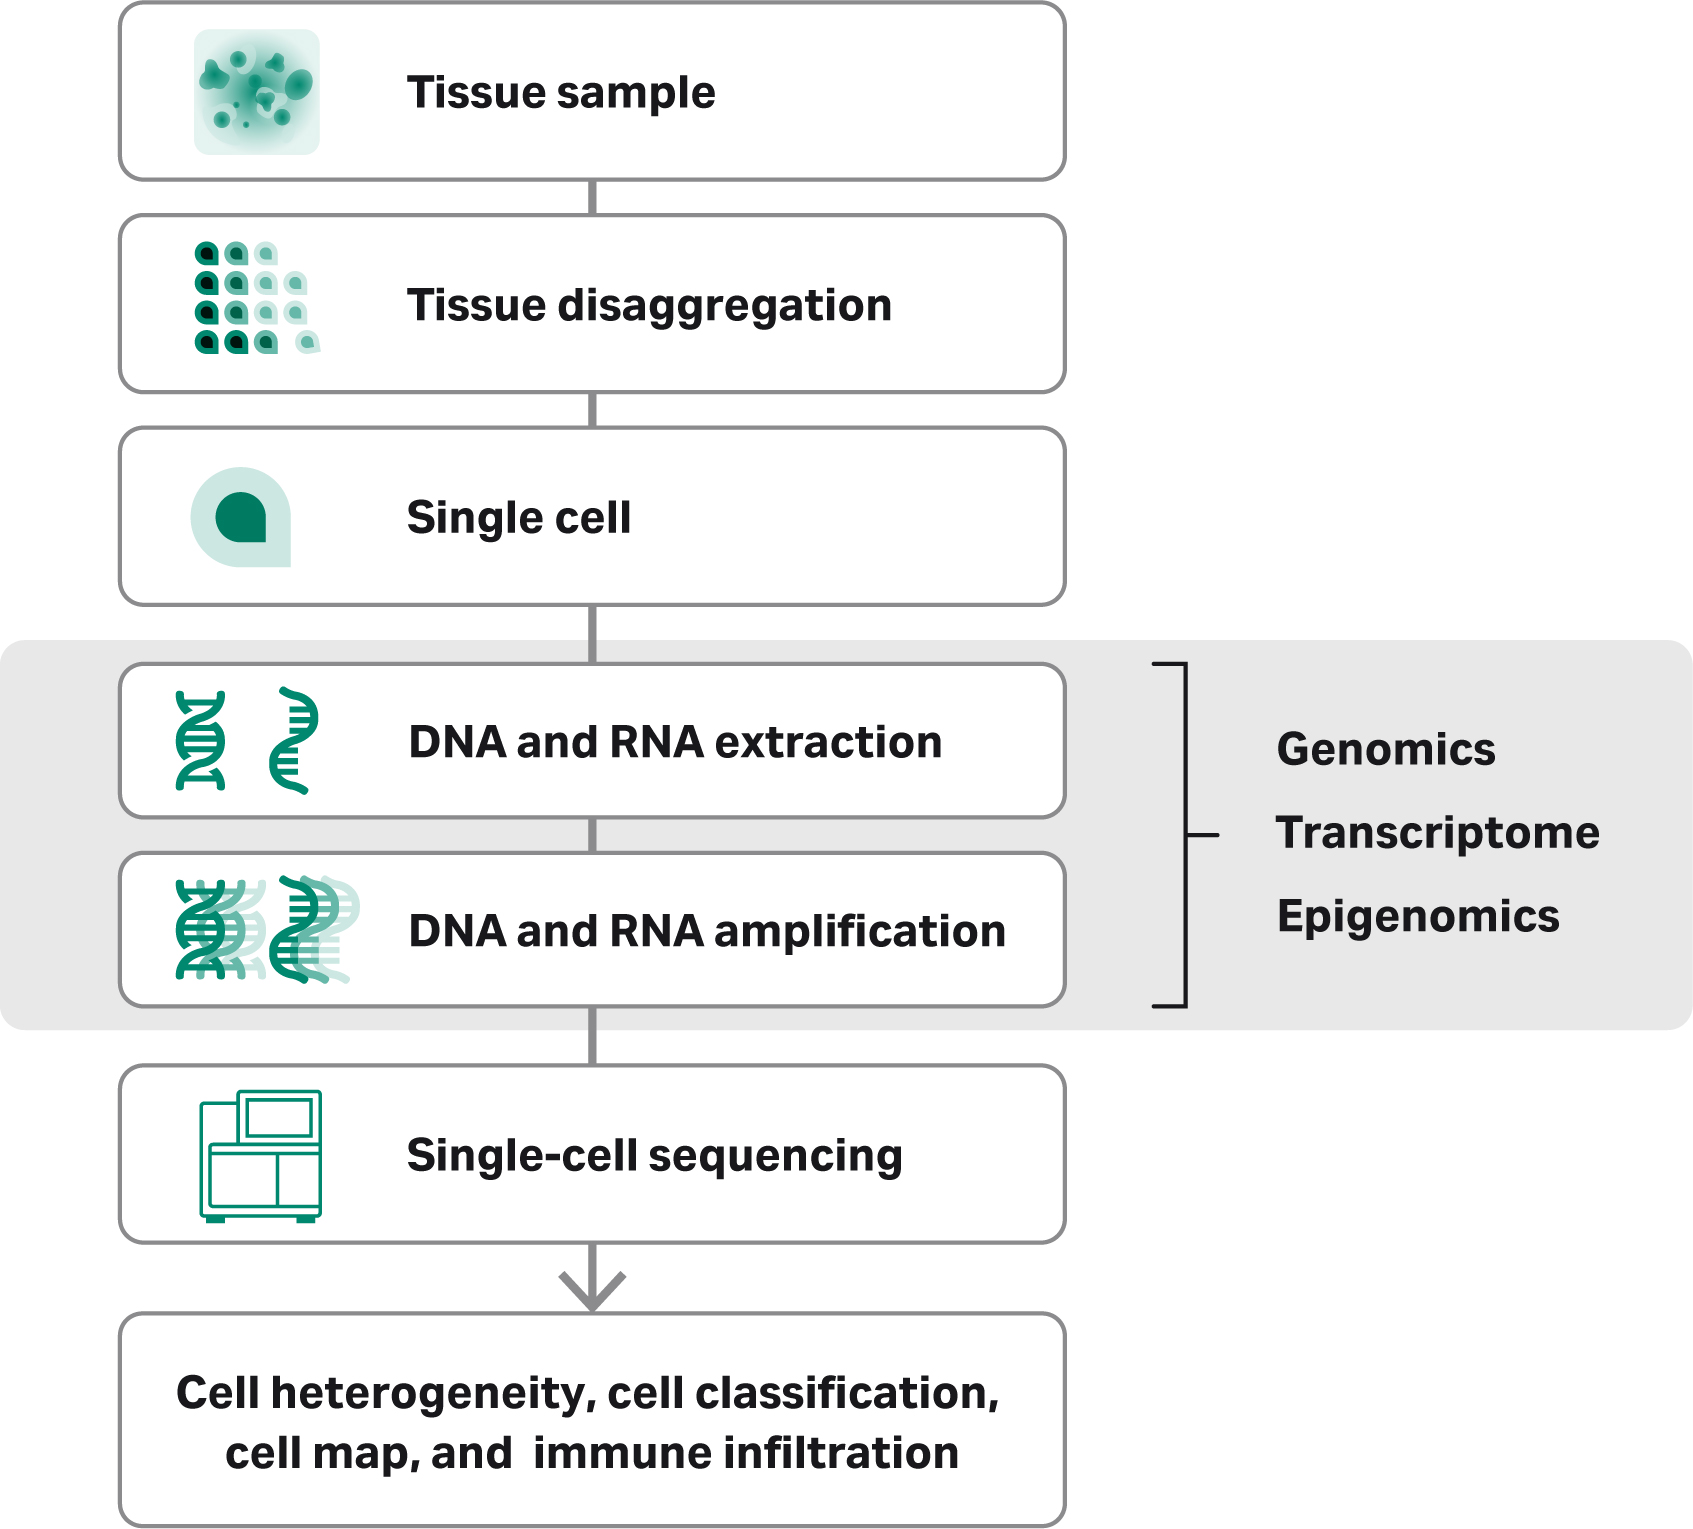 Overview of the single-cell sequencing workflow, including collection, isolation, amplification sequencing and data analysis.